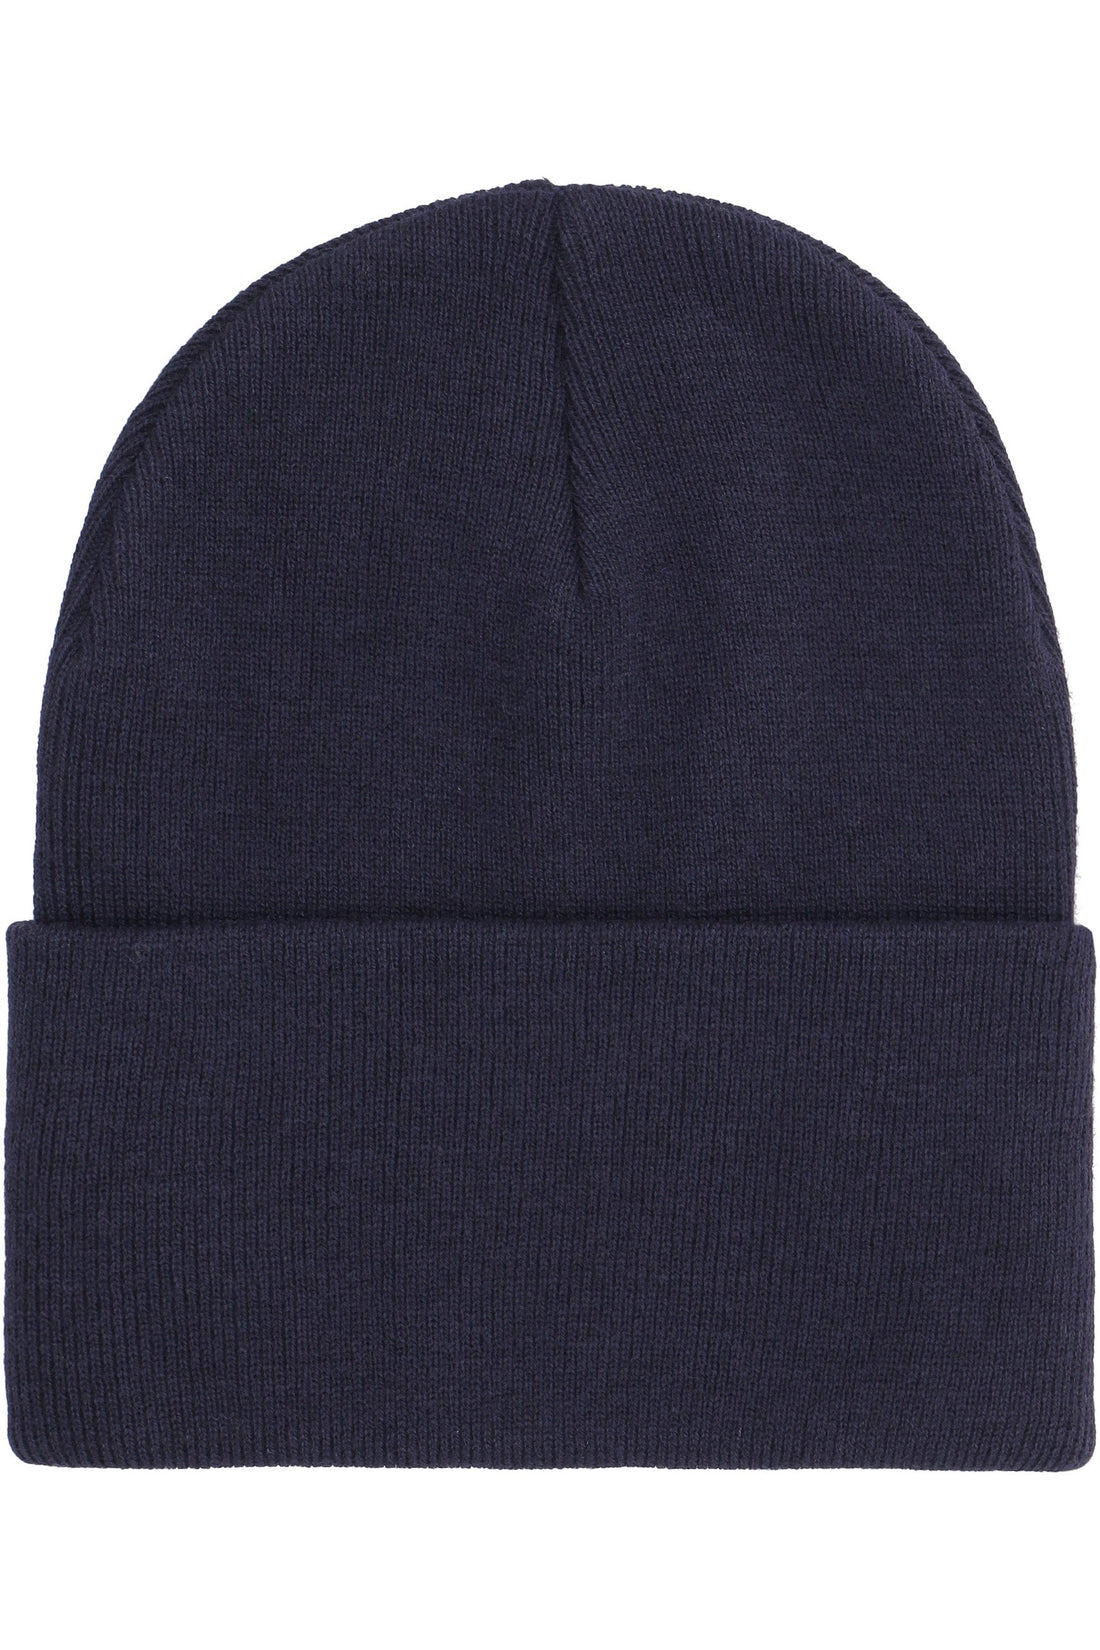 Carhartt-OUTLET-SALE-Ribbed knit beanie-ARCHIVIST